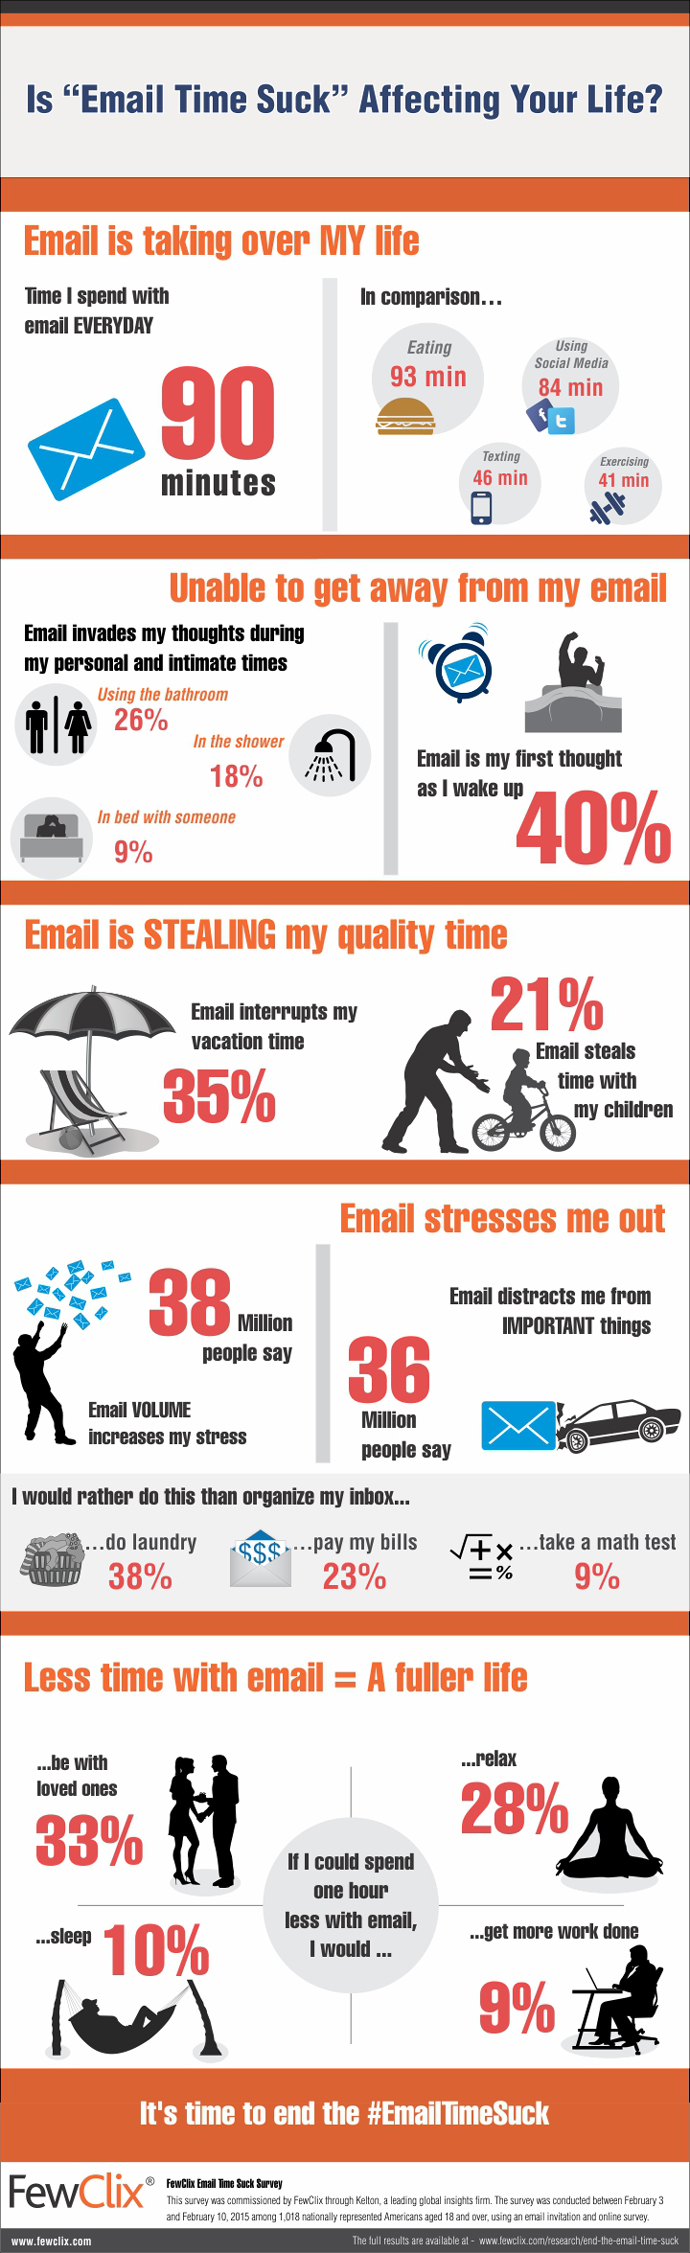 Infographic FewClix Email Time Suck Survey